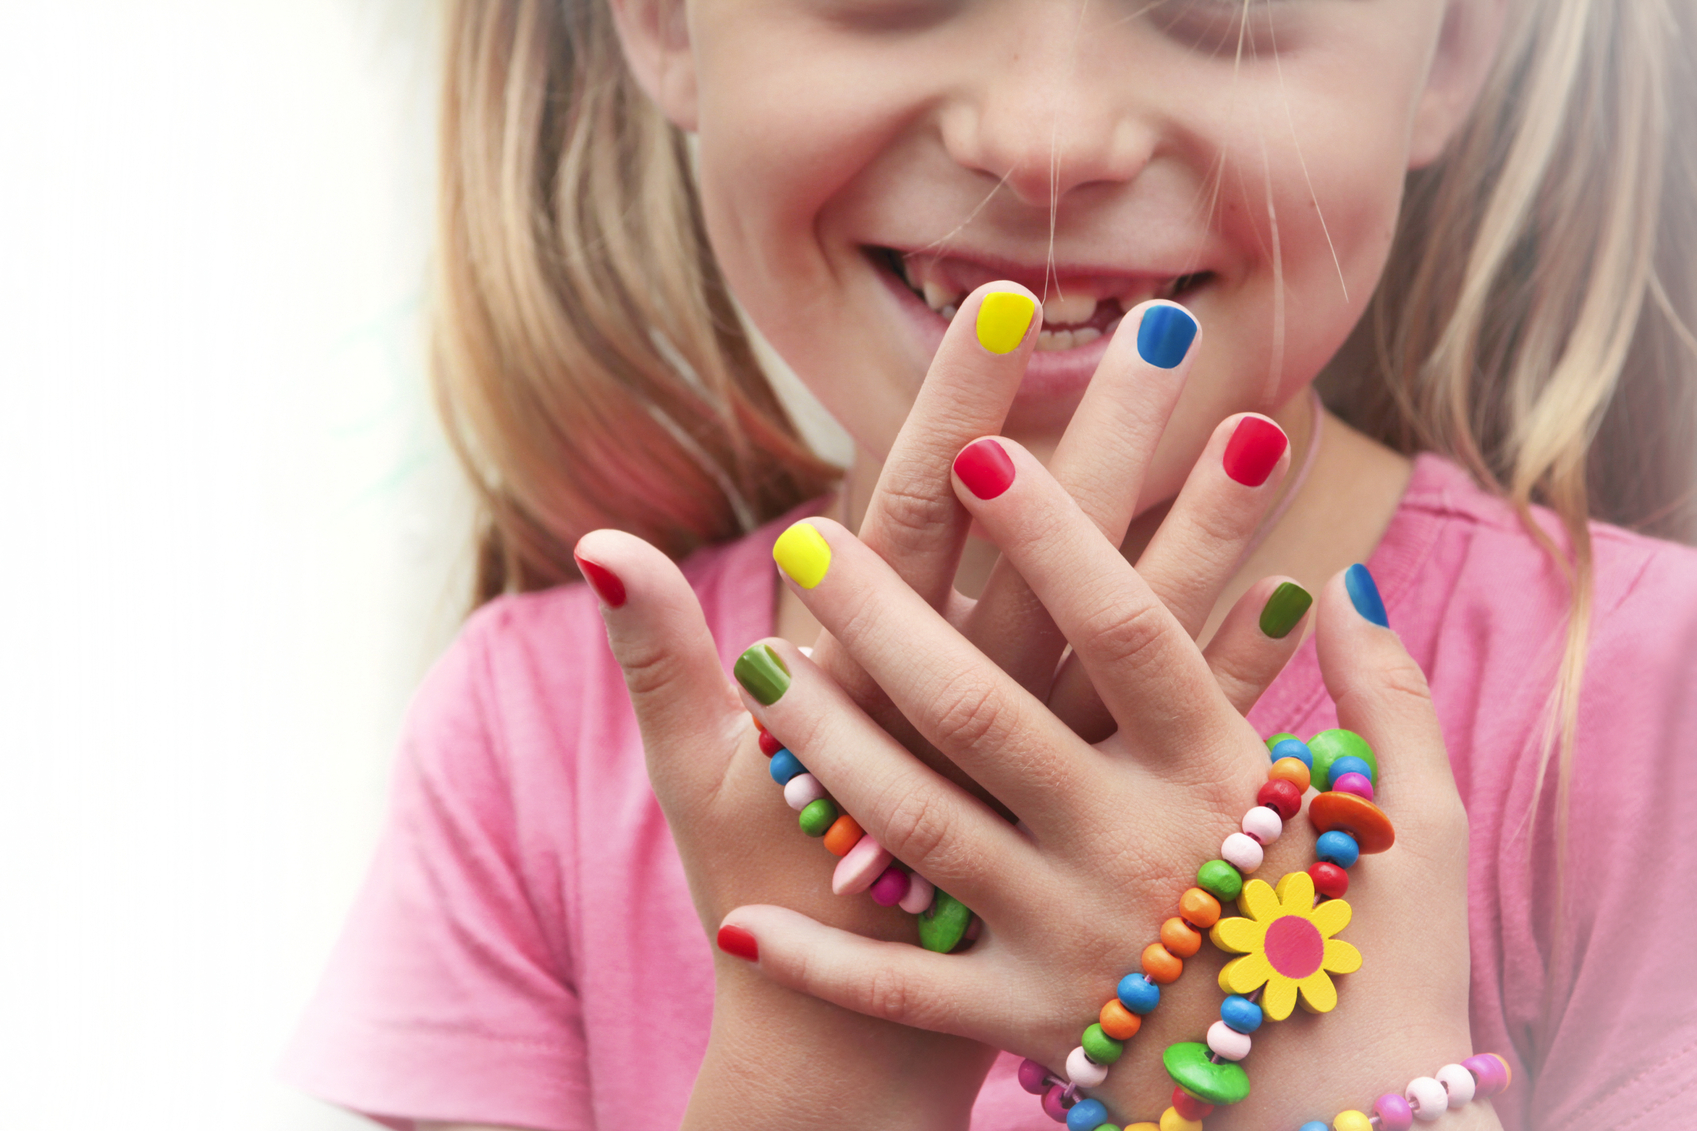 Should little girls be allowed to get manicures?